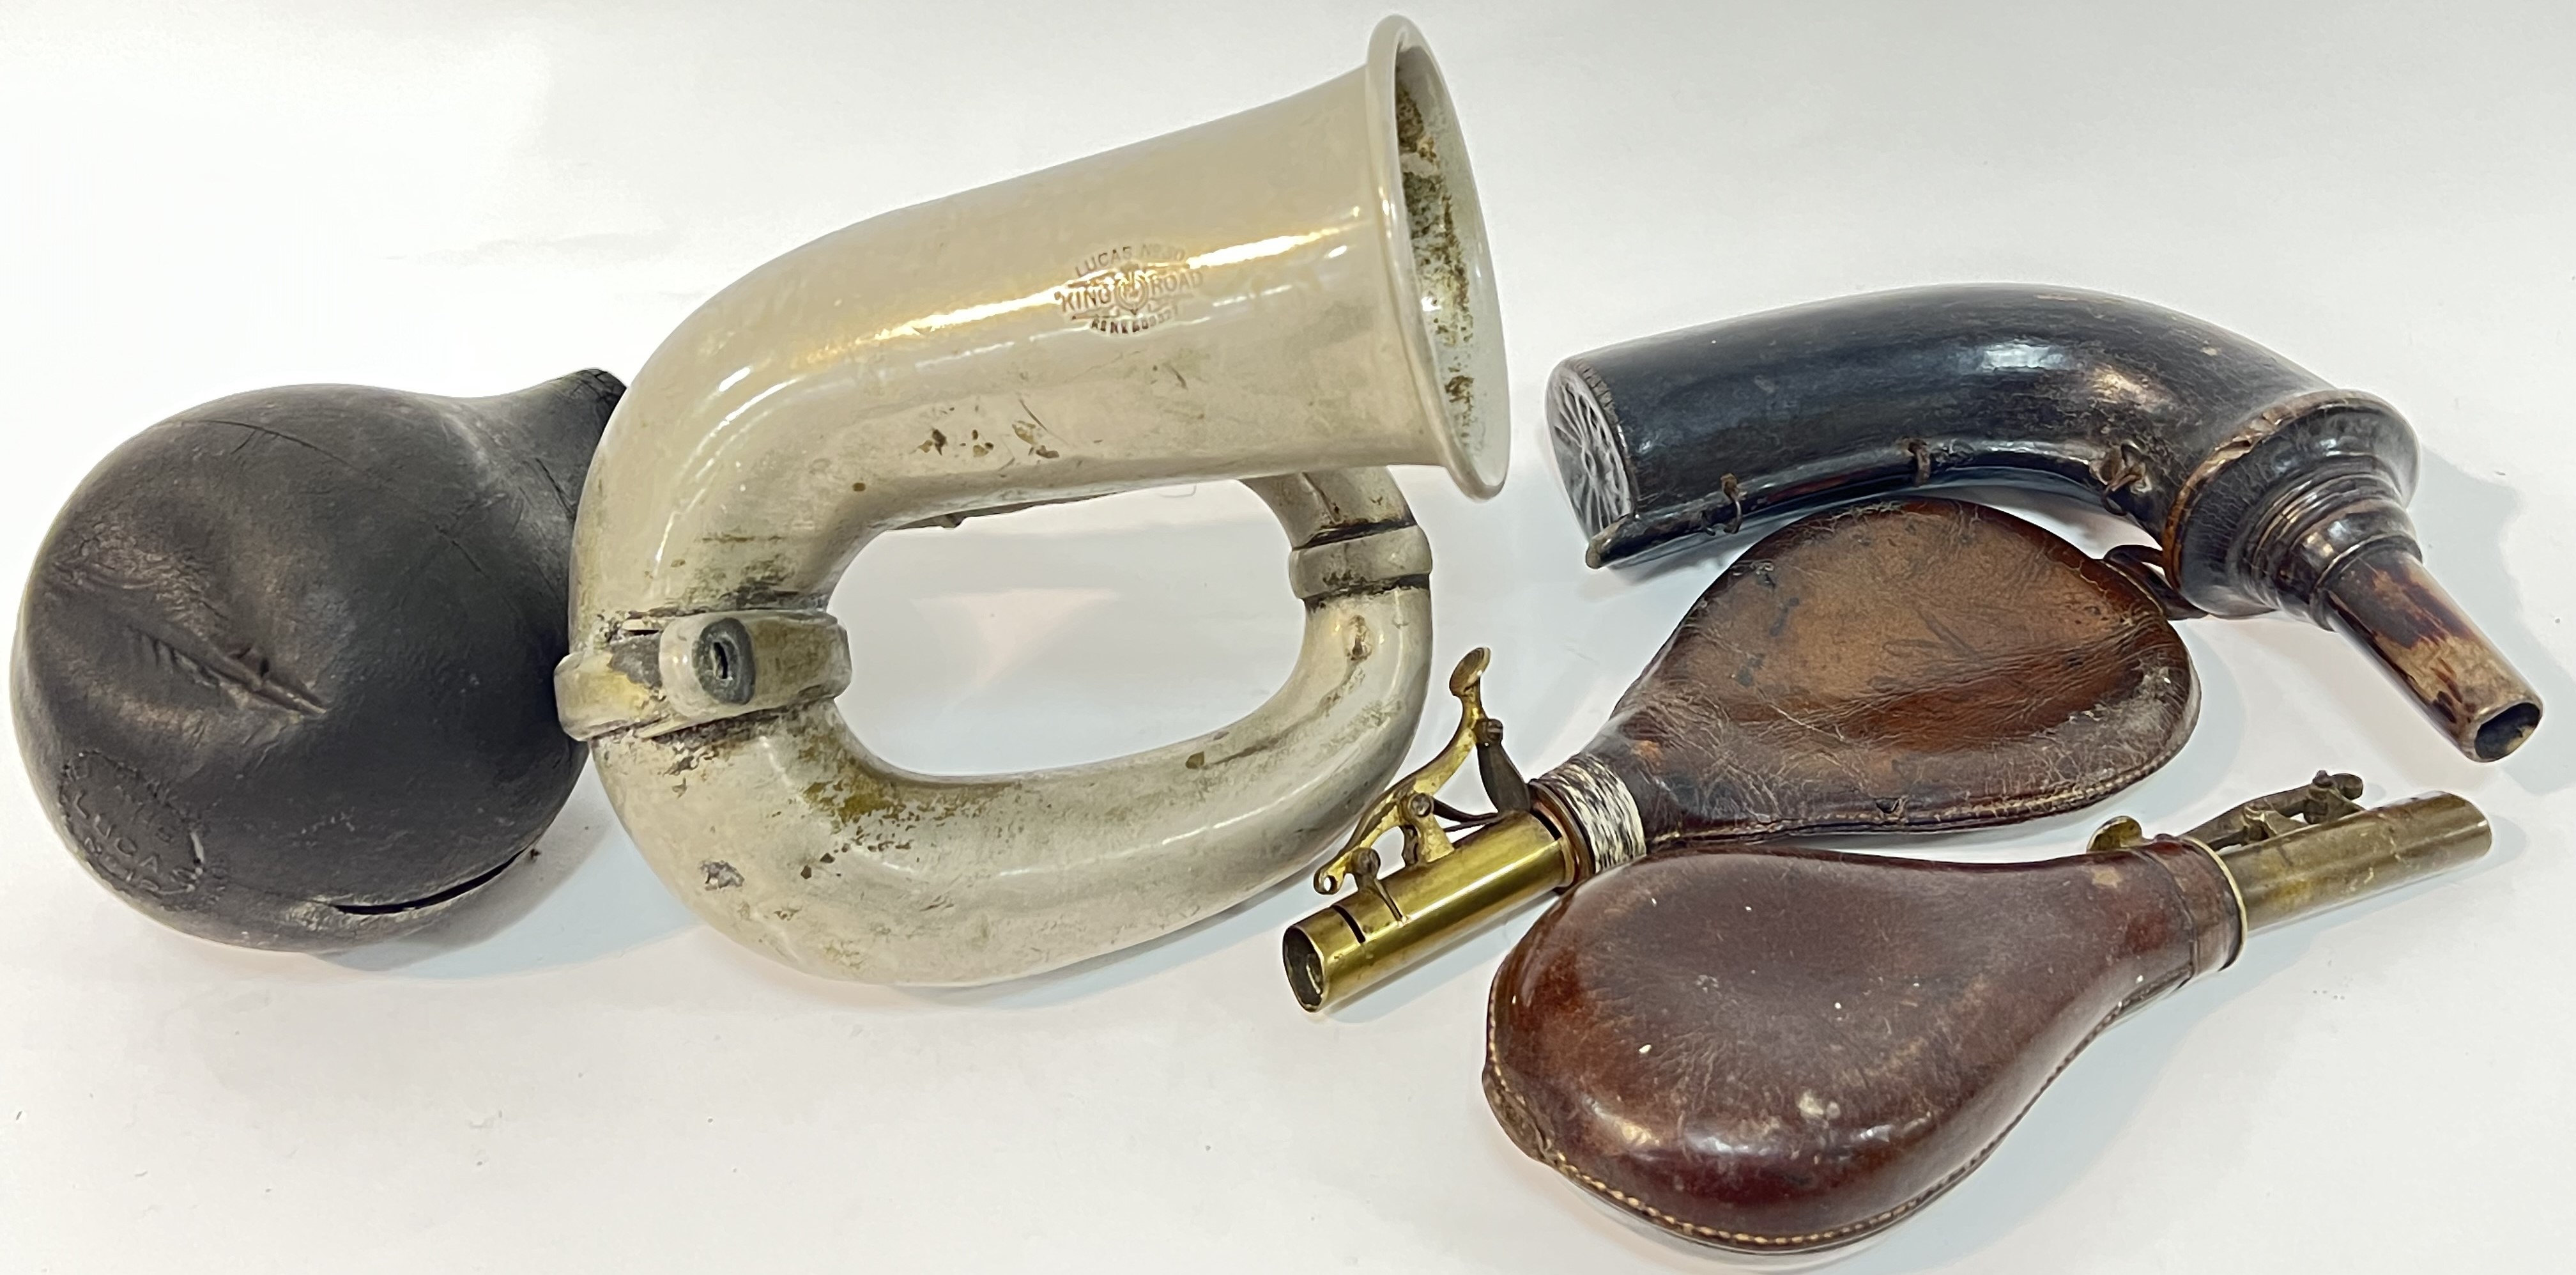 A vintage Lucas "King of the Road" motoring horn together with a pair of brass and leather powder